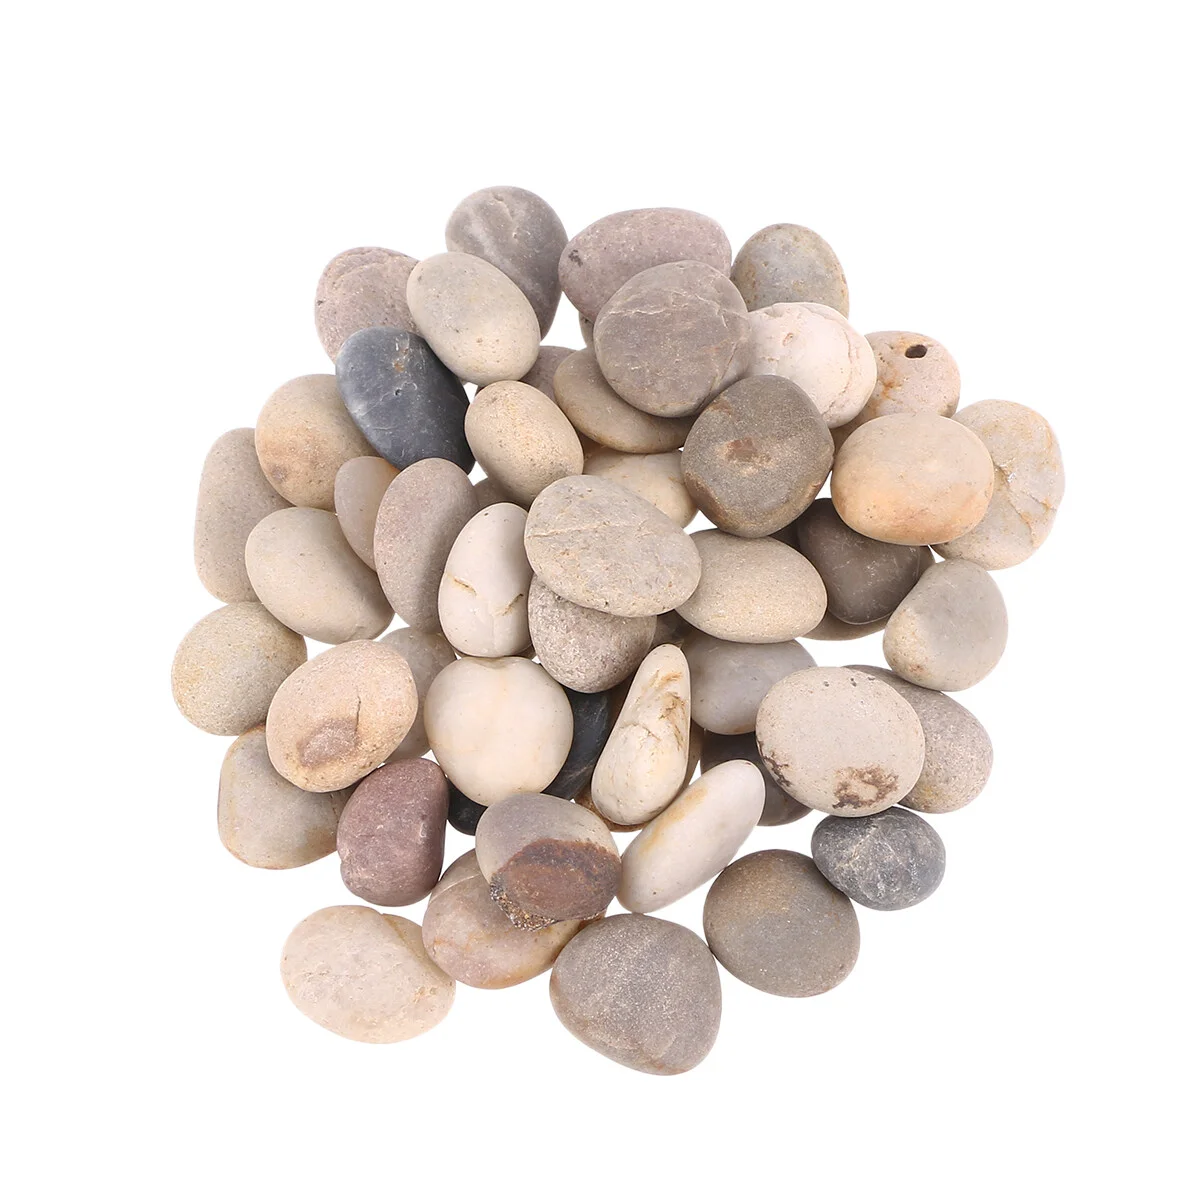 

50pcs Tiny Painting Rocks Diy Rocks for Painting Rocks Smooth Surface Stones and Crafts Tank Decoration 1- 3CM